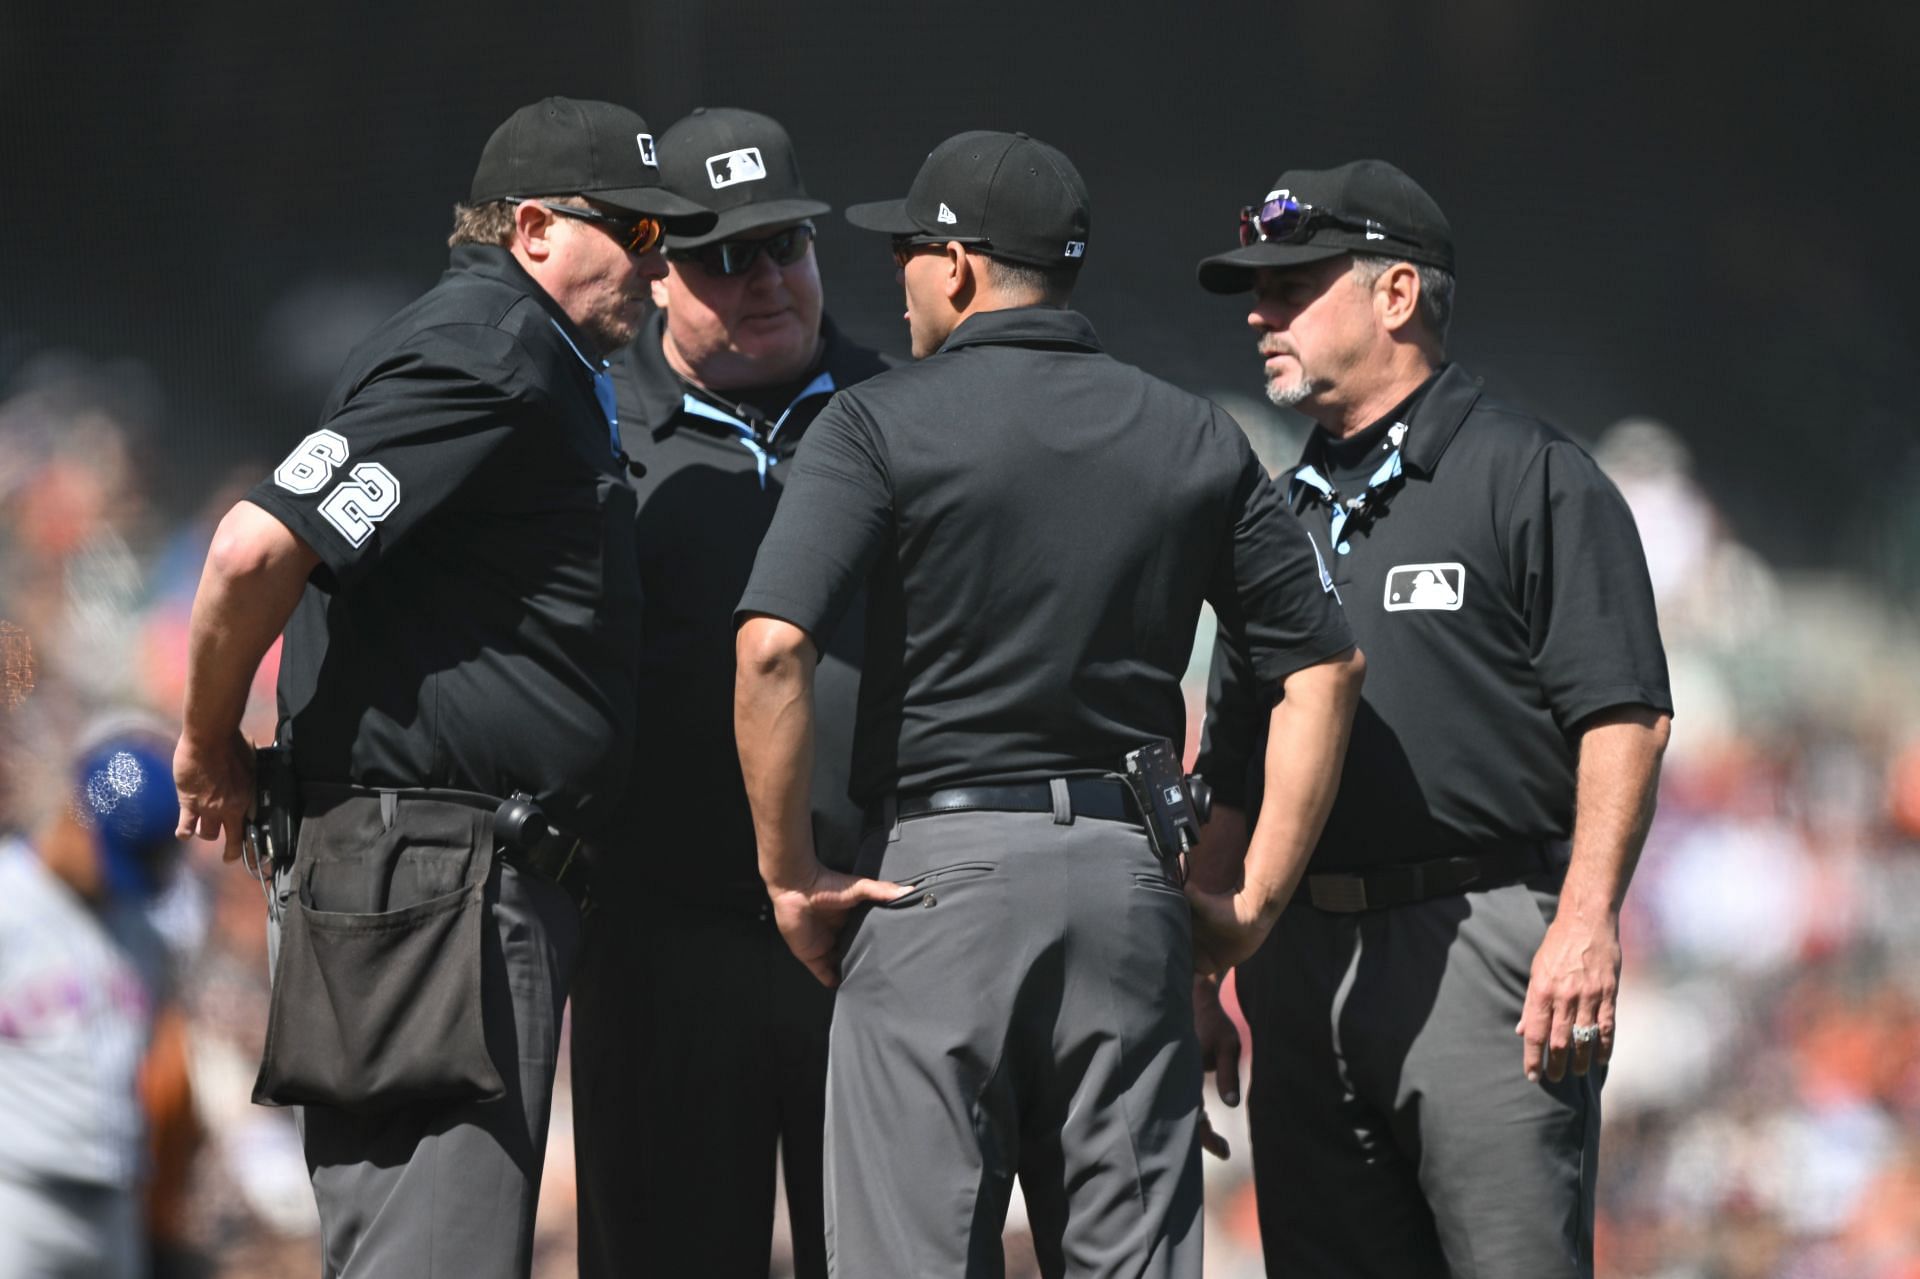 Roberto Ortiz becomes first MLB umpire from Puerto Rico